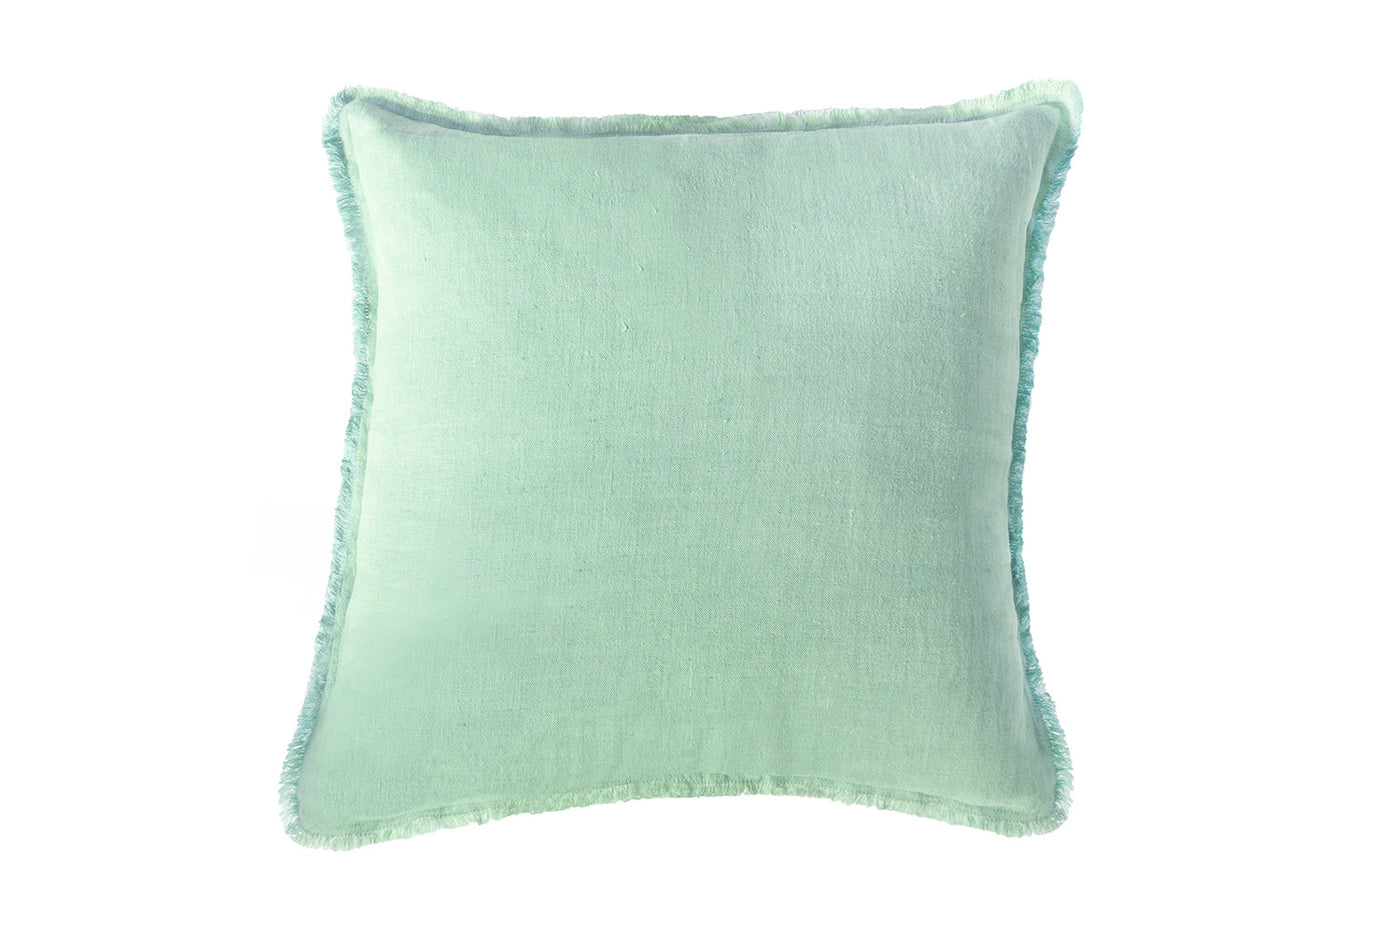 Mint Green So Soft Fringe Linen Pillows by Anaya